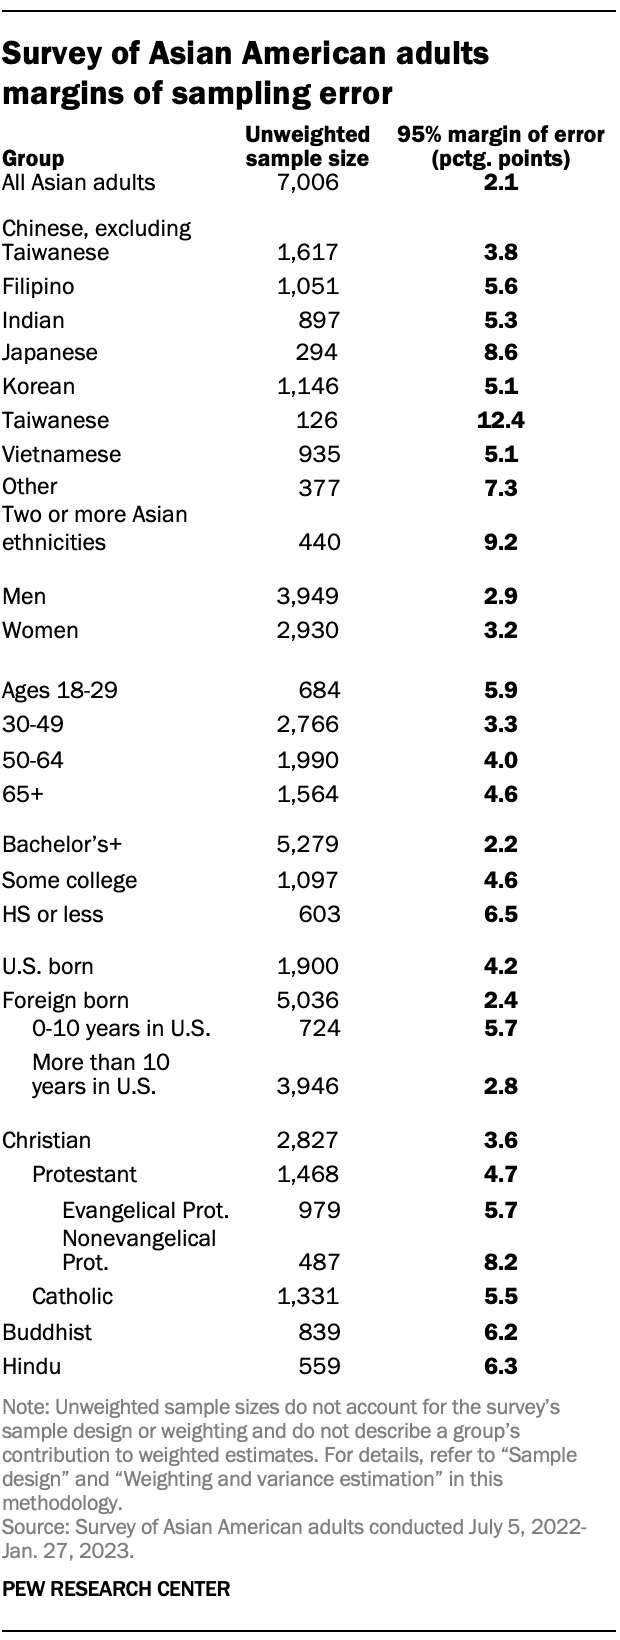 A table showing the margins of sampling error among demographic groups in the 2022-23 survey of Asian American adults.